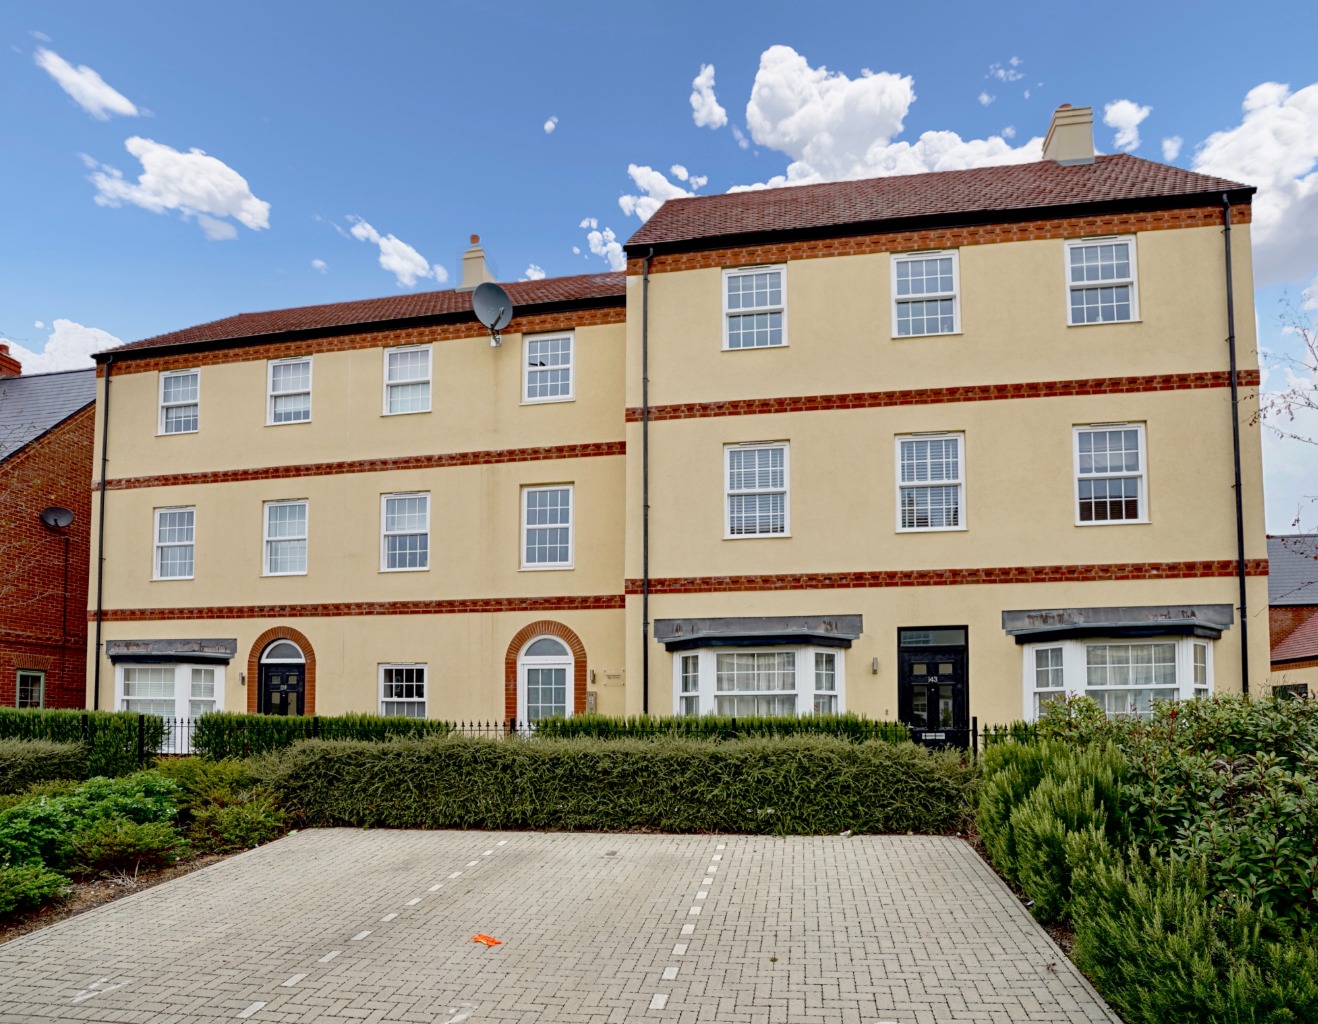 2 bed flat for sale in Walston Way, Huntingdon - Property Image 1